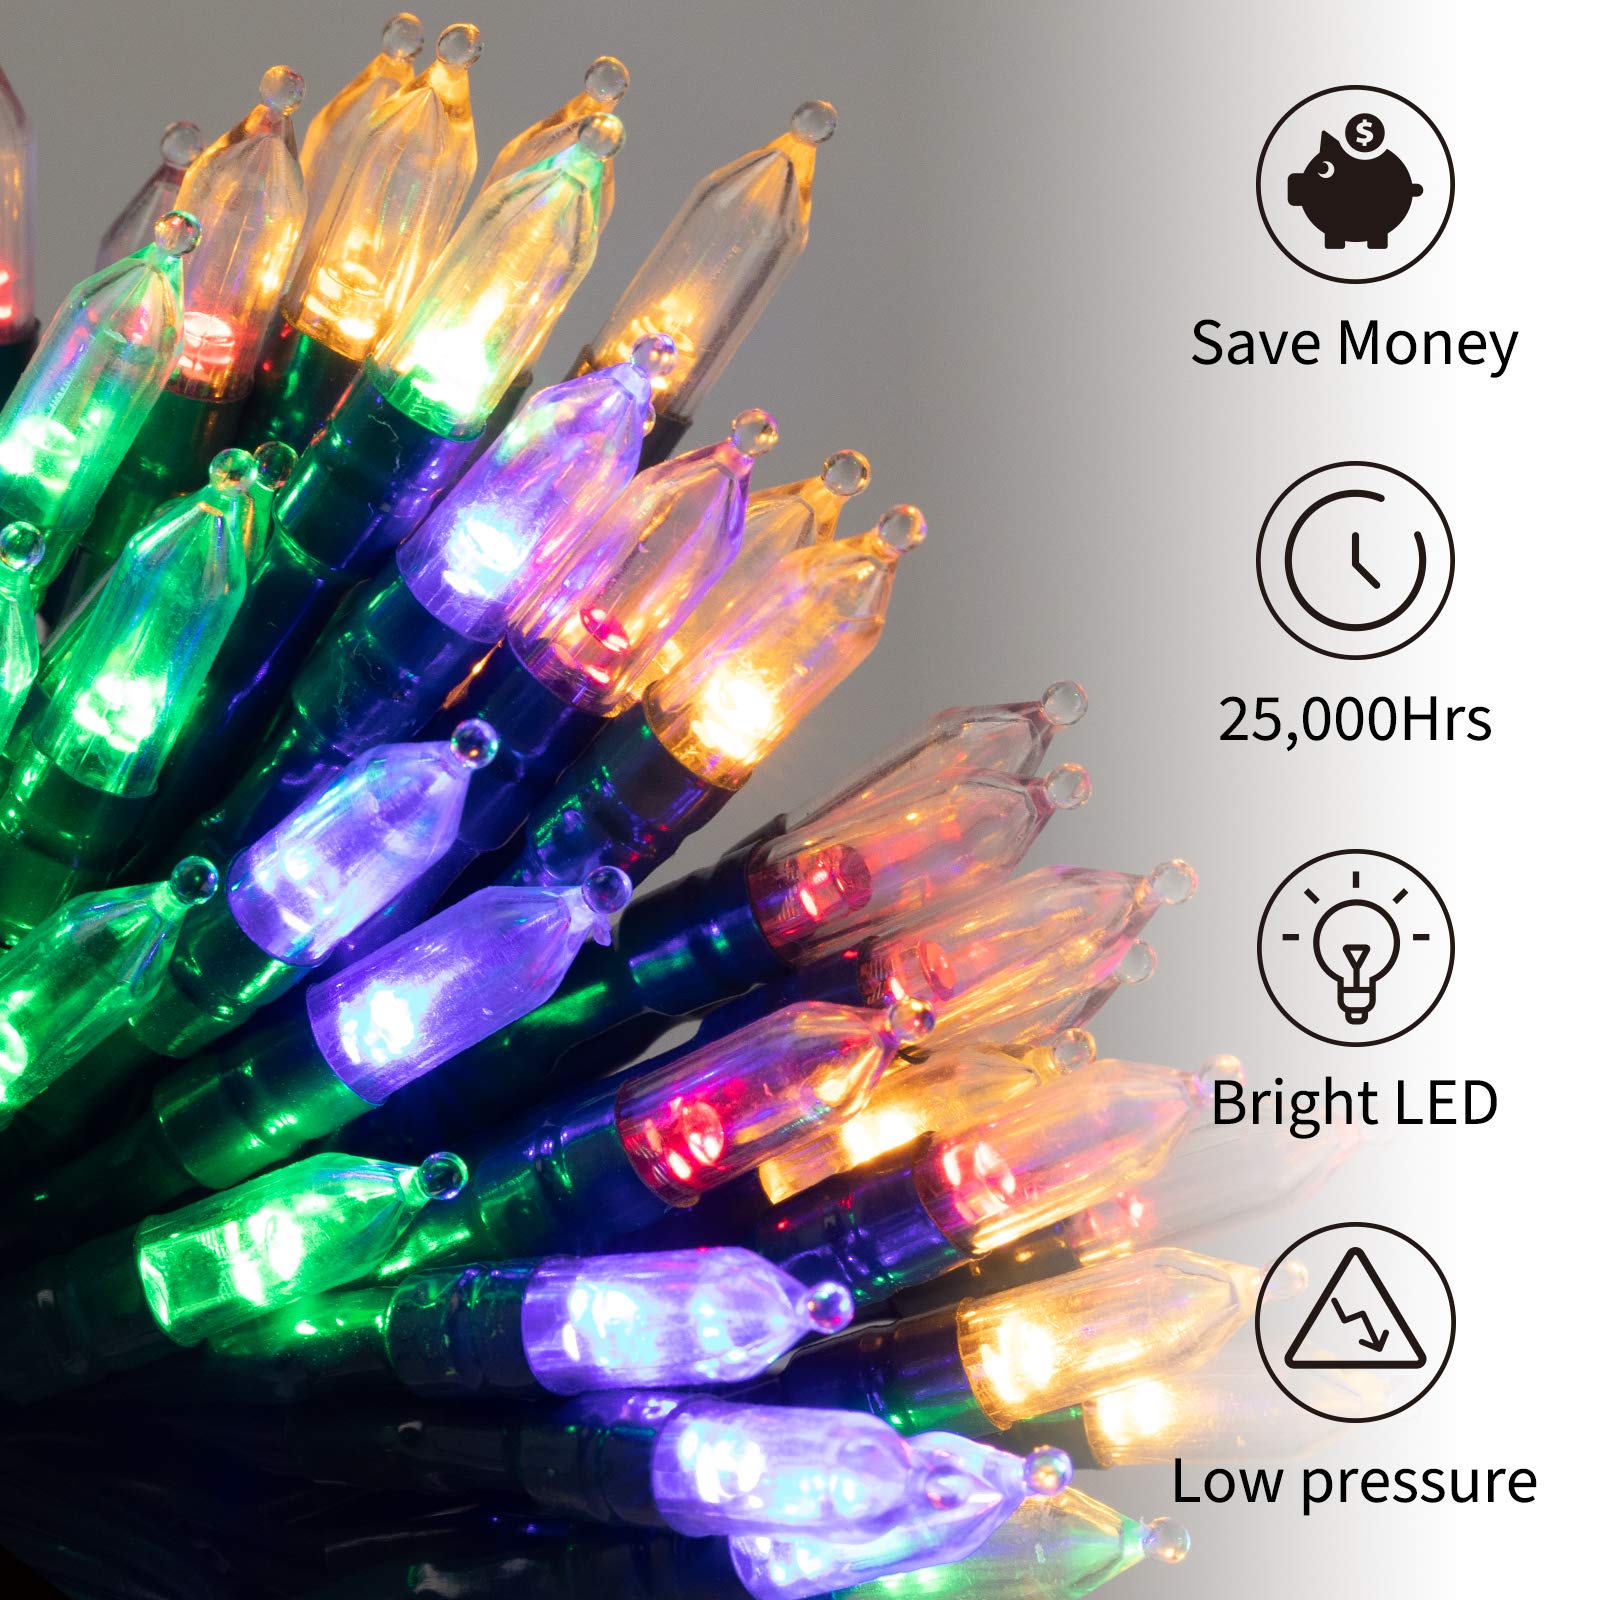 1 x 75 Feet / 200 LED / Warm White and Multicolor / Green Wire